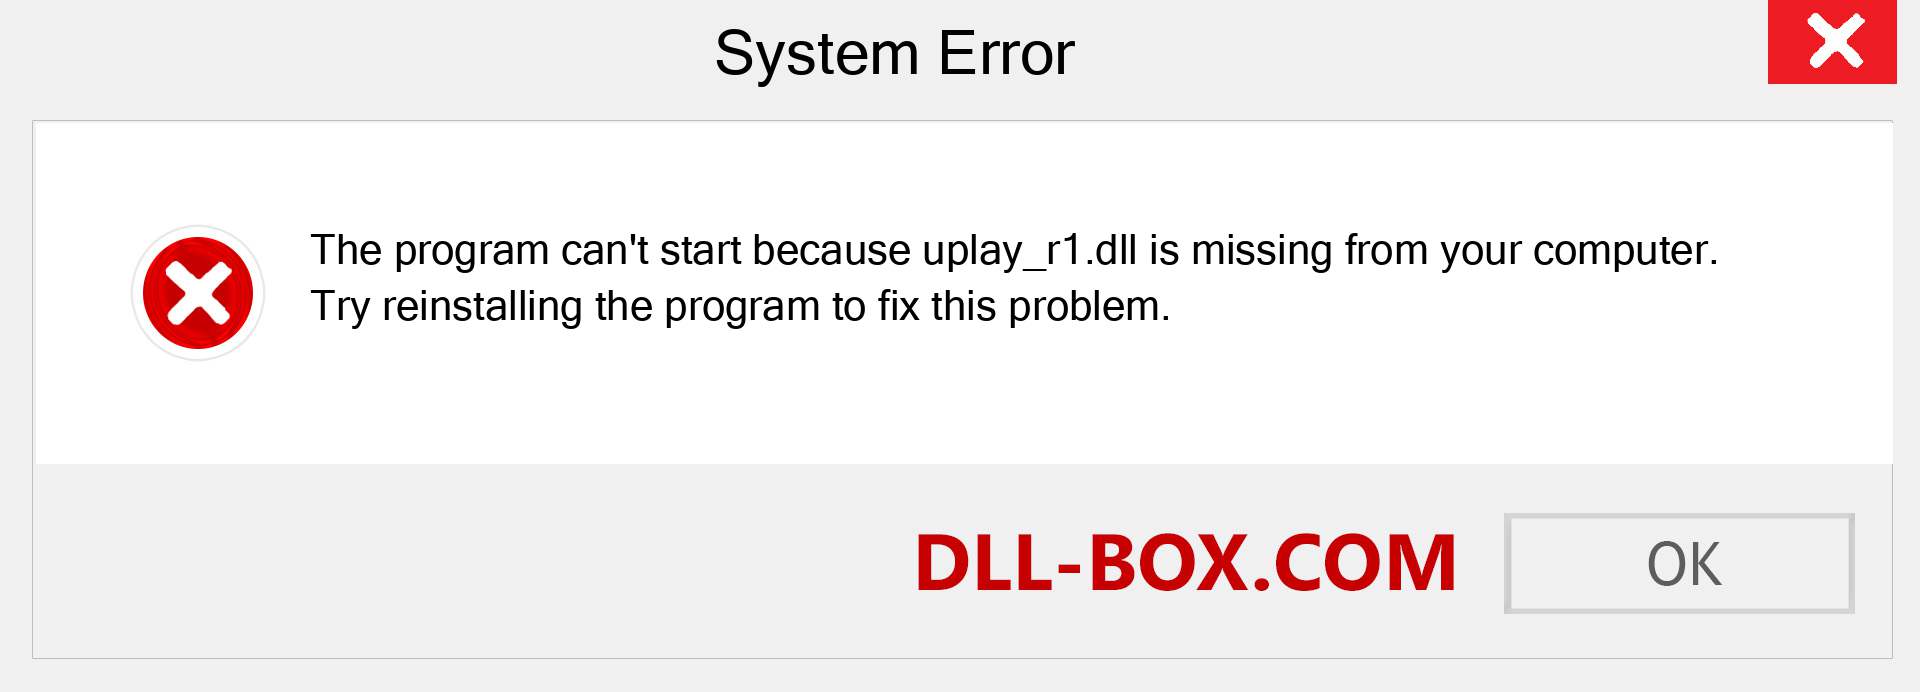  uplay_r1.dll file is missing?. Download for Windows 7, 8, 10 - Fix  uplay_r1 dll Missing Error on Windows, photos, images